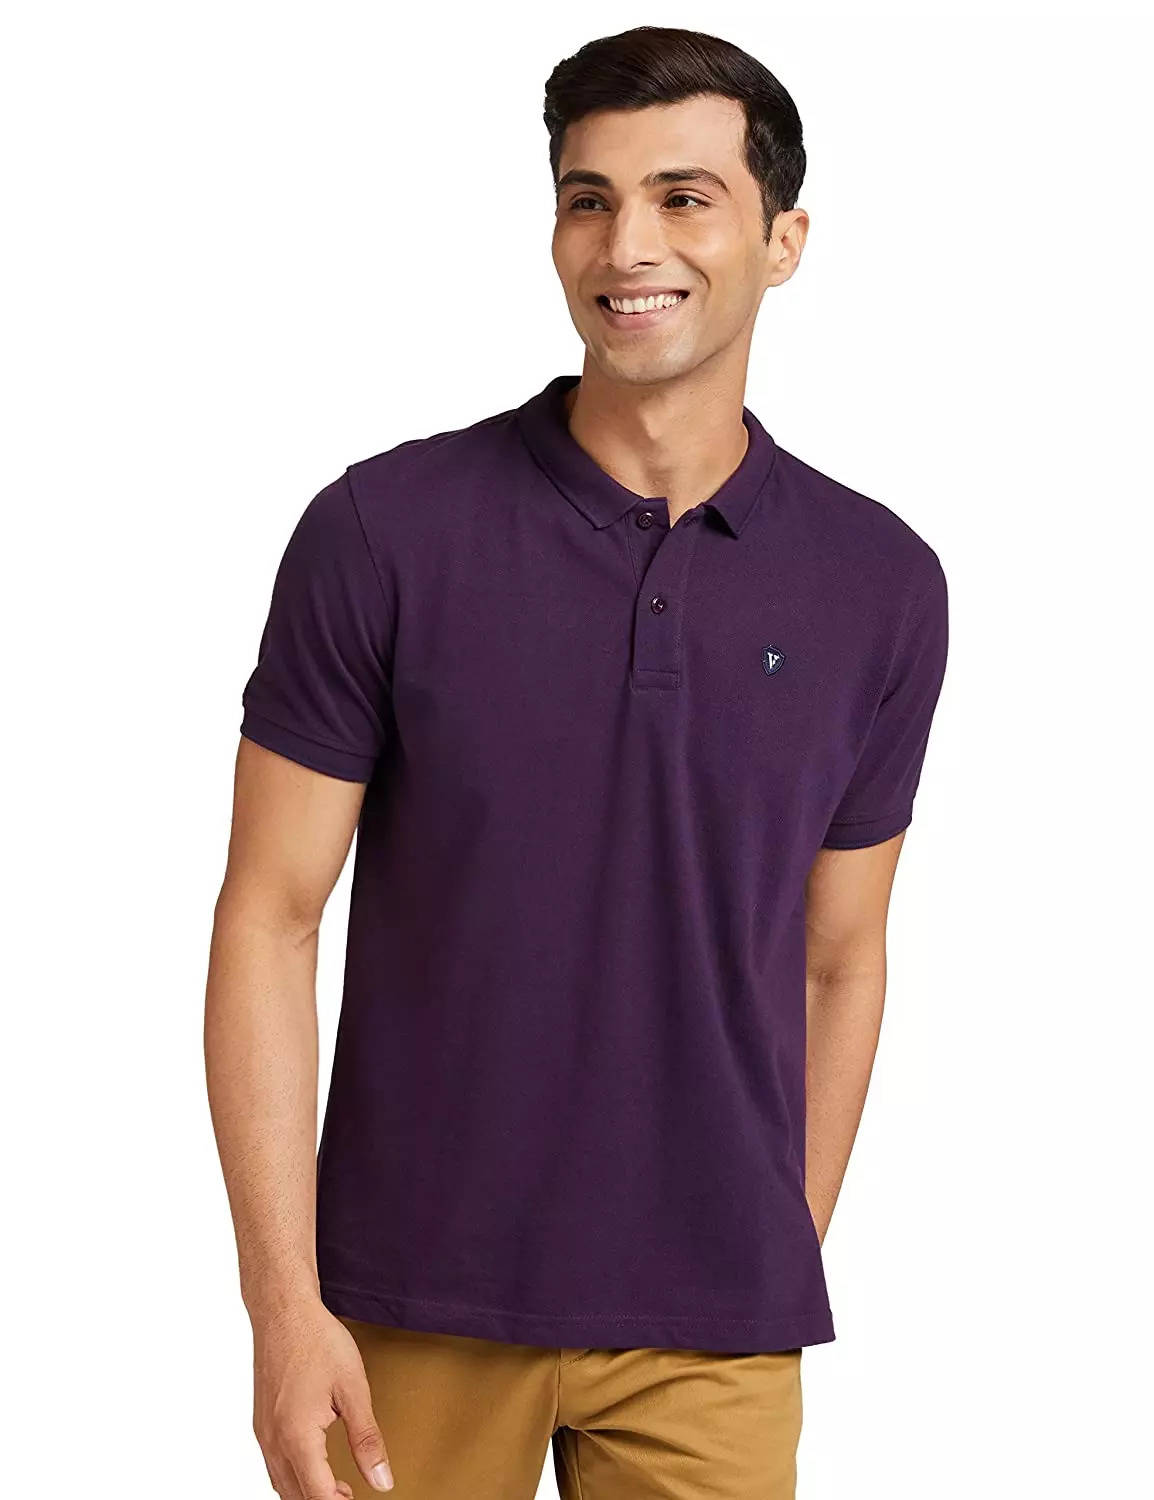 Mens Sports Shirts Tees: Buy Mens Sports Shirts Tees Online at Best Prices  in India